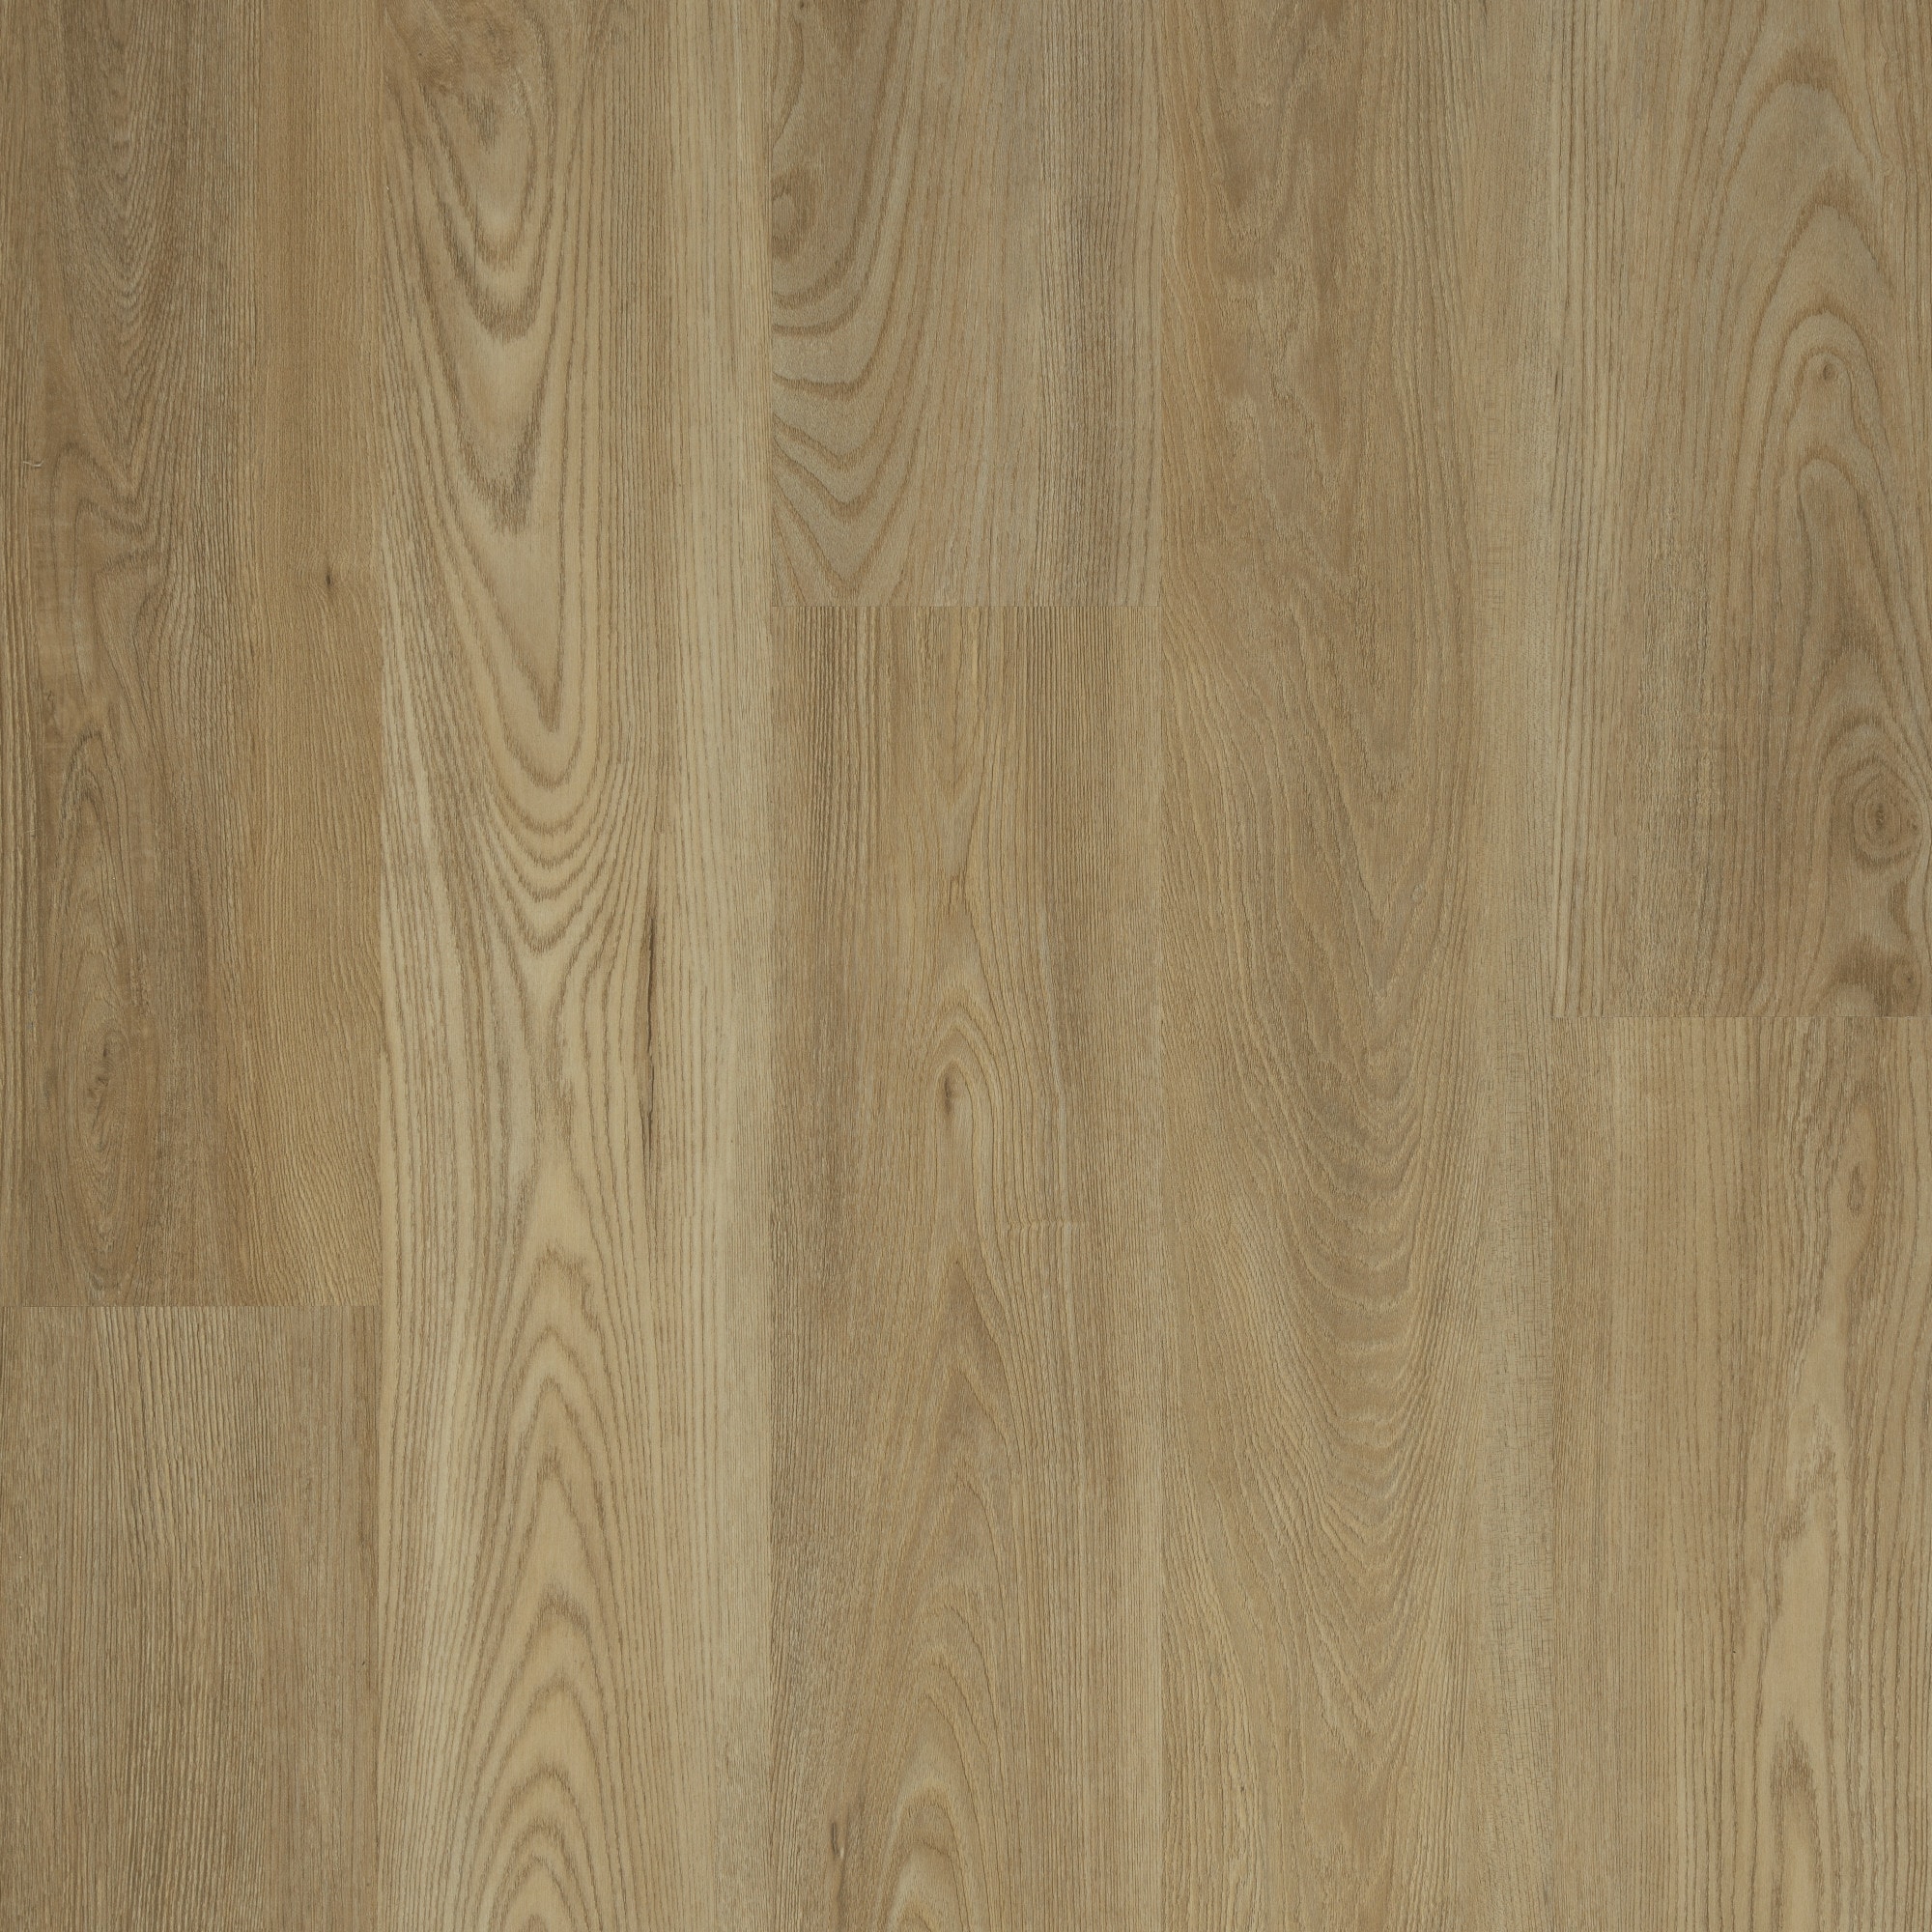 Shaw Matrix with Advance Flex Technology Toffee Elm 6-in Wide x 3-1/5-mm  Thick Waterproof Interlocking Luxury Vinyl Plank Flooring (23.63-sq ft) in  the Vinyl Plank department at Lowes.com